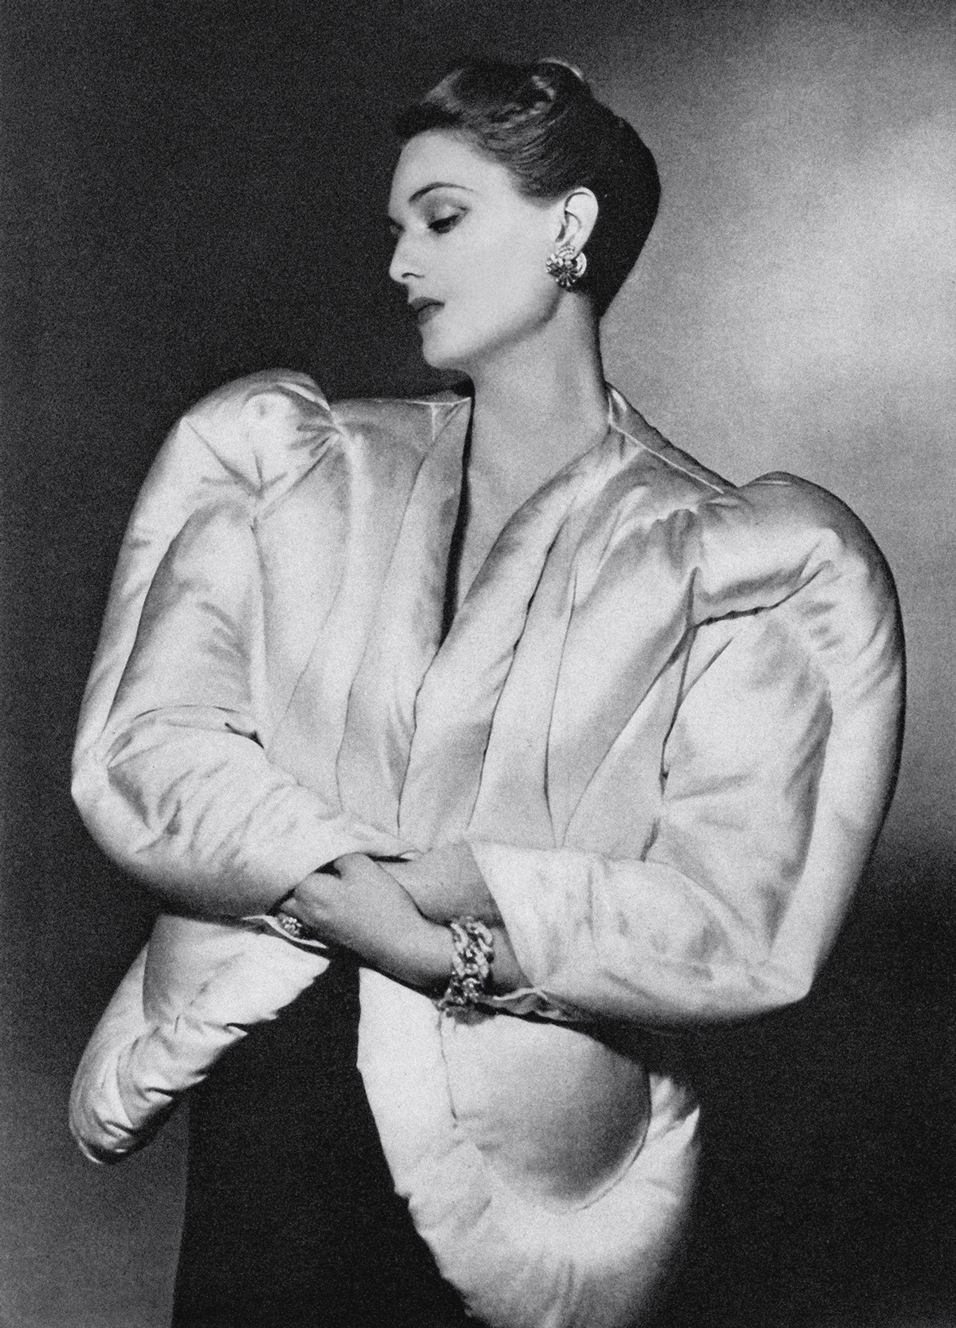 Evening jacket of quilted white satin, designed by Charles James, Paris, 1937